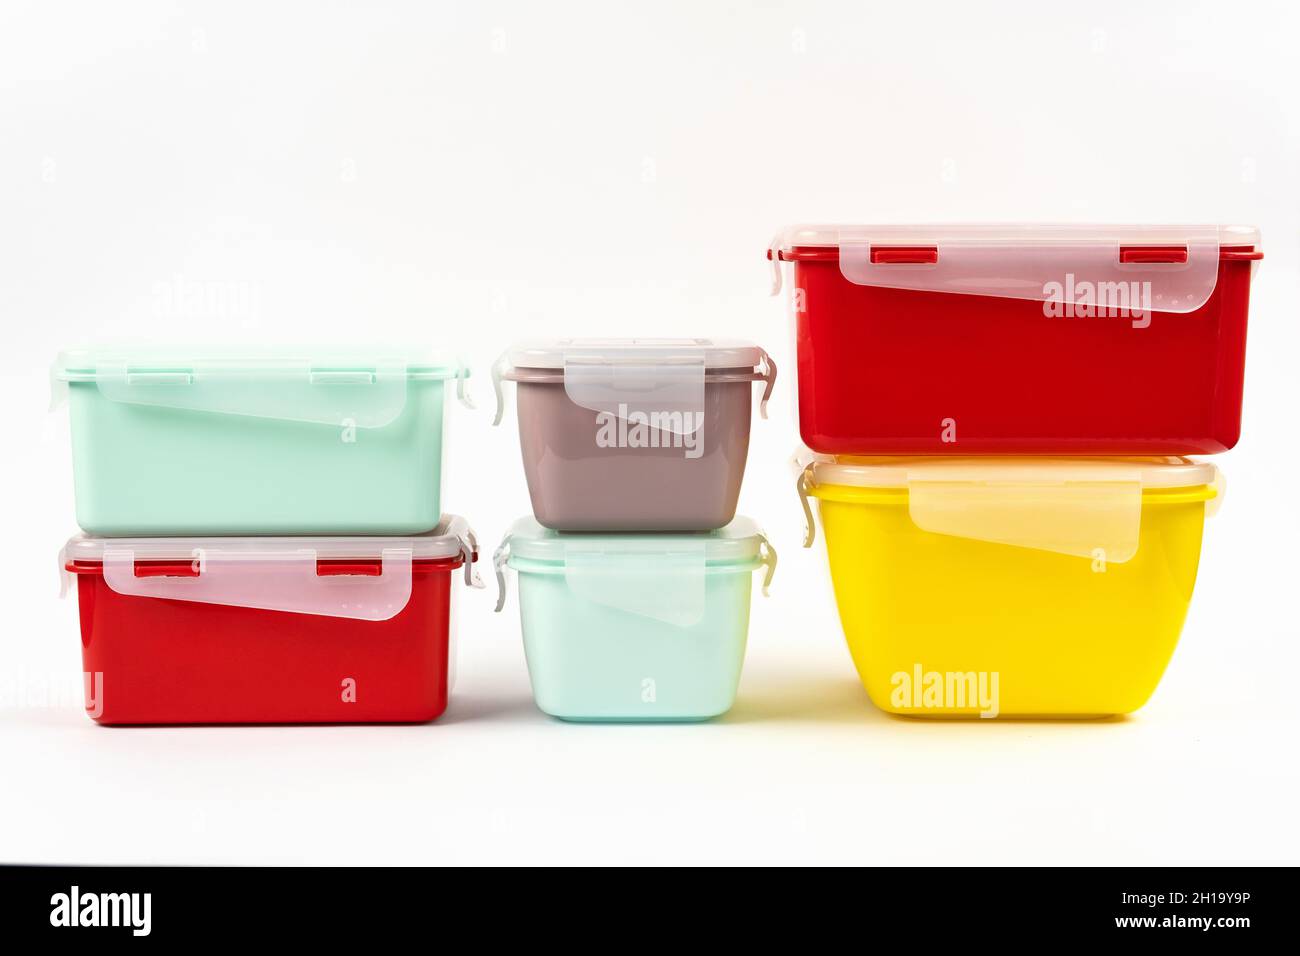 https://c8.alamy.com/comp/2H19Y9P/plastic-multi-colored-containers-for-food-products-isolated-on-white-background-stack-of-lunch-boxes-side-view-2H19Y9P.jpg